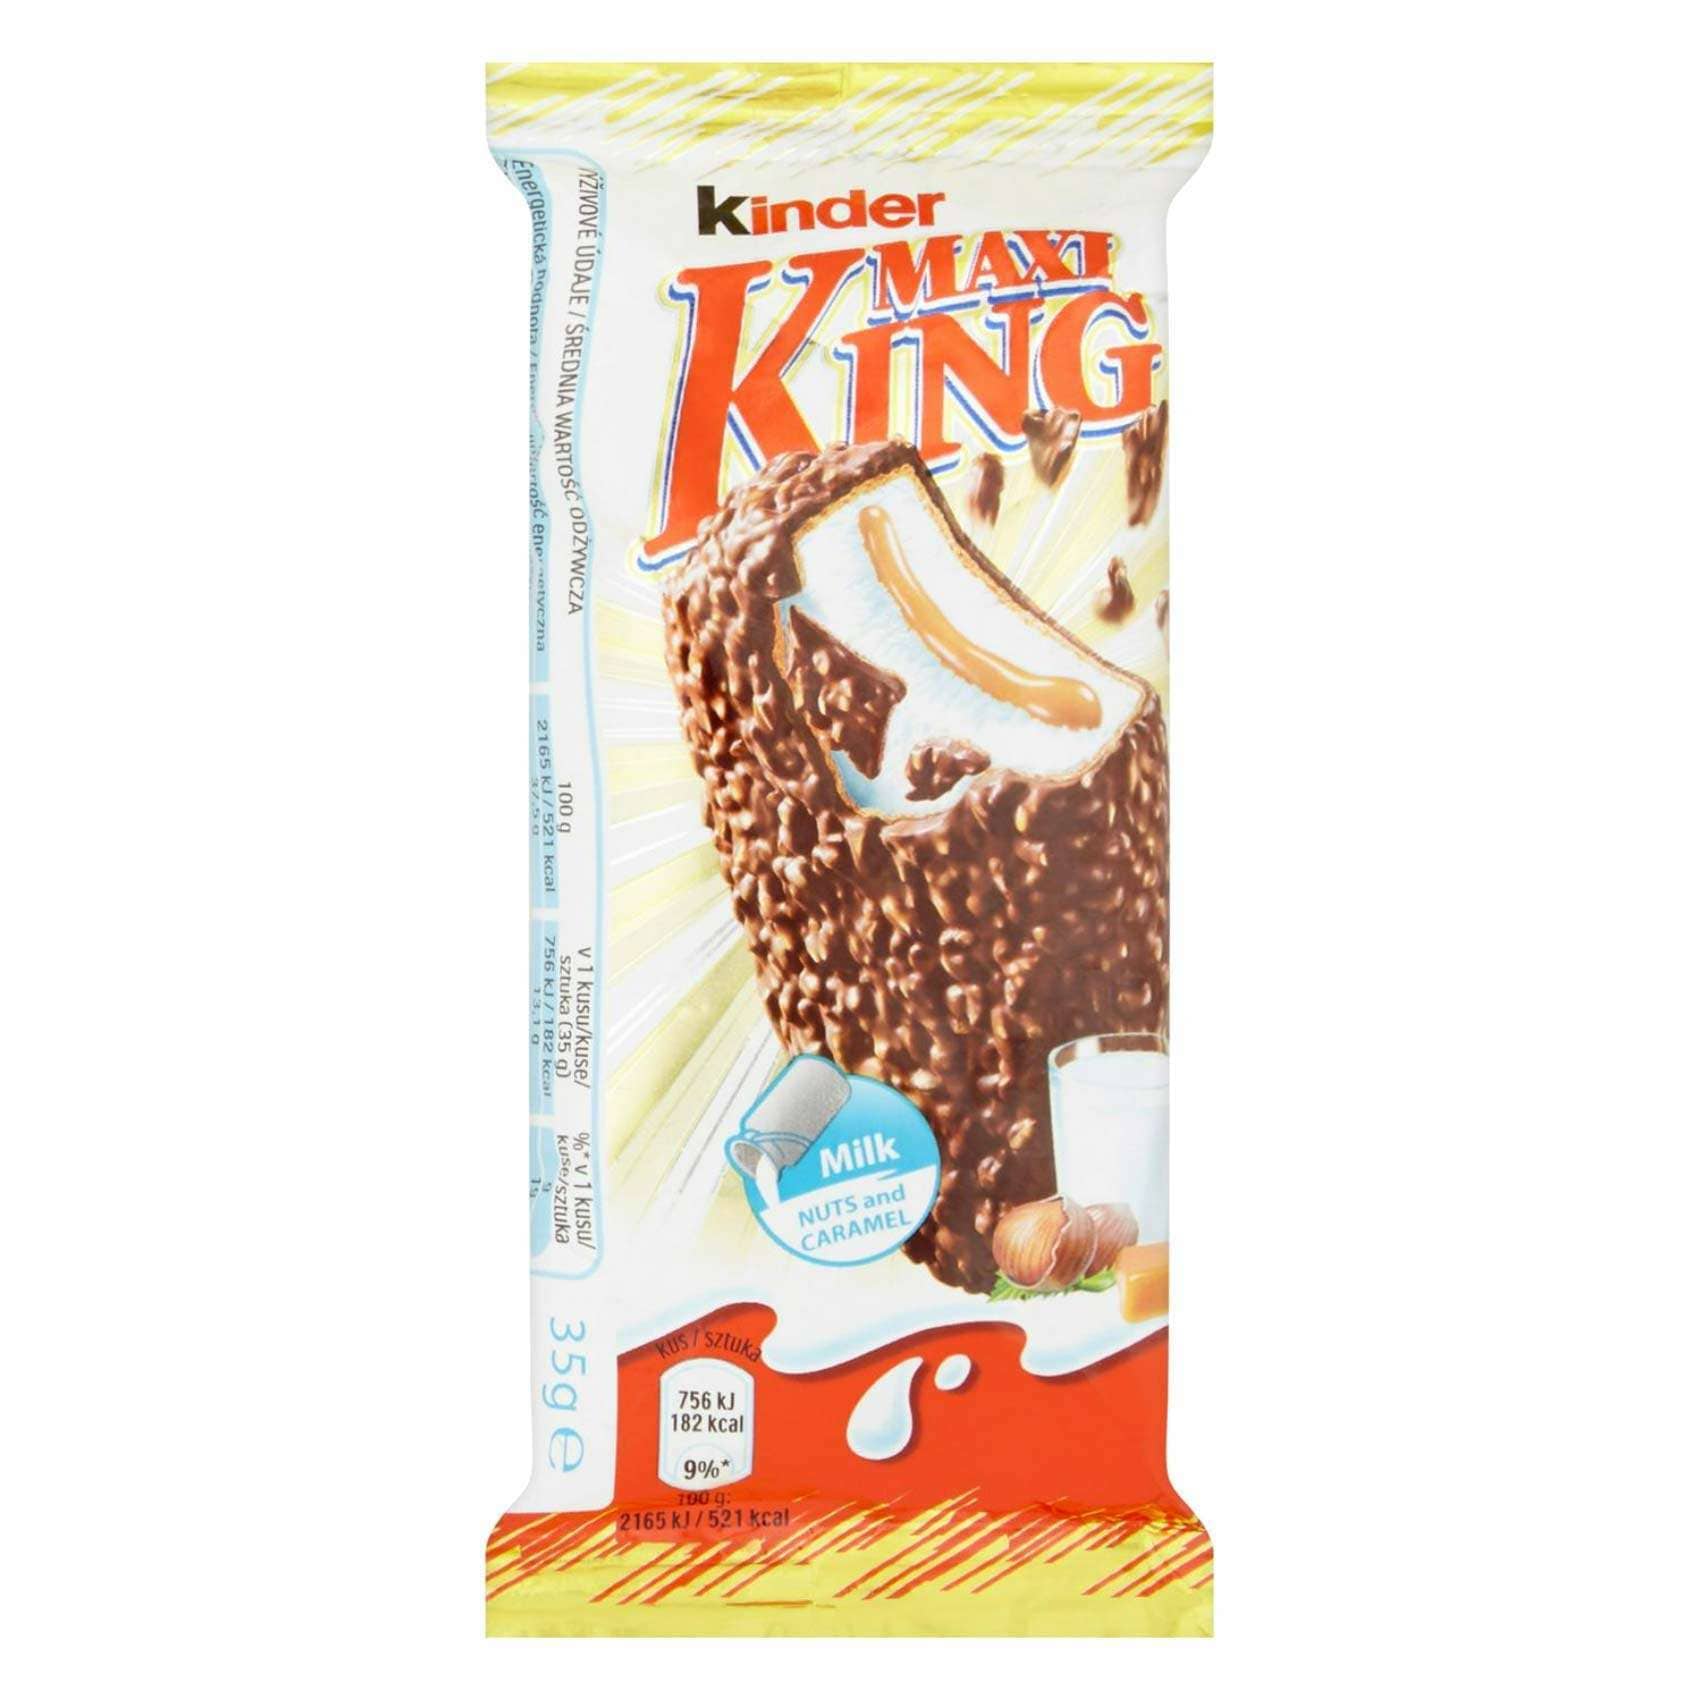 Buy Kinder Maxi King Ice Cream Bar 35g Online - Shop Baby Products on